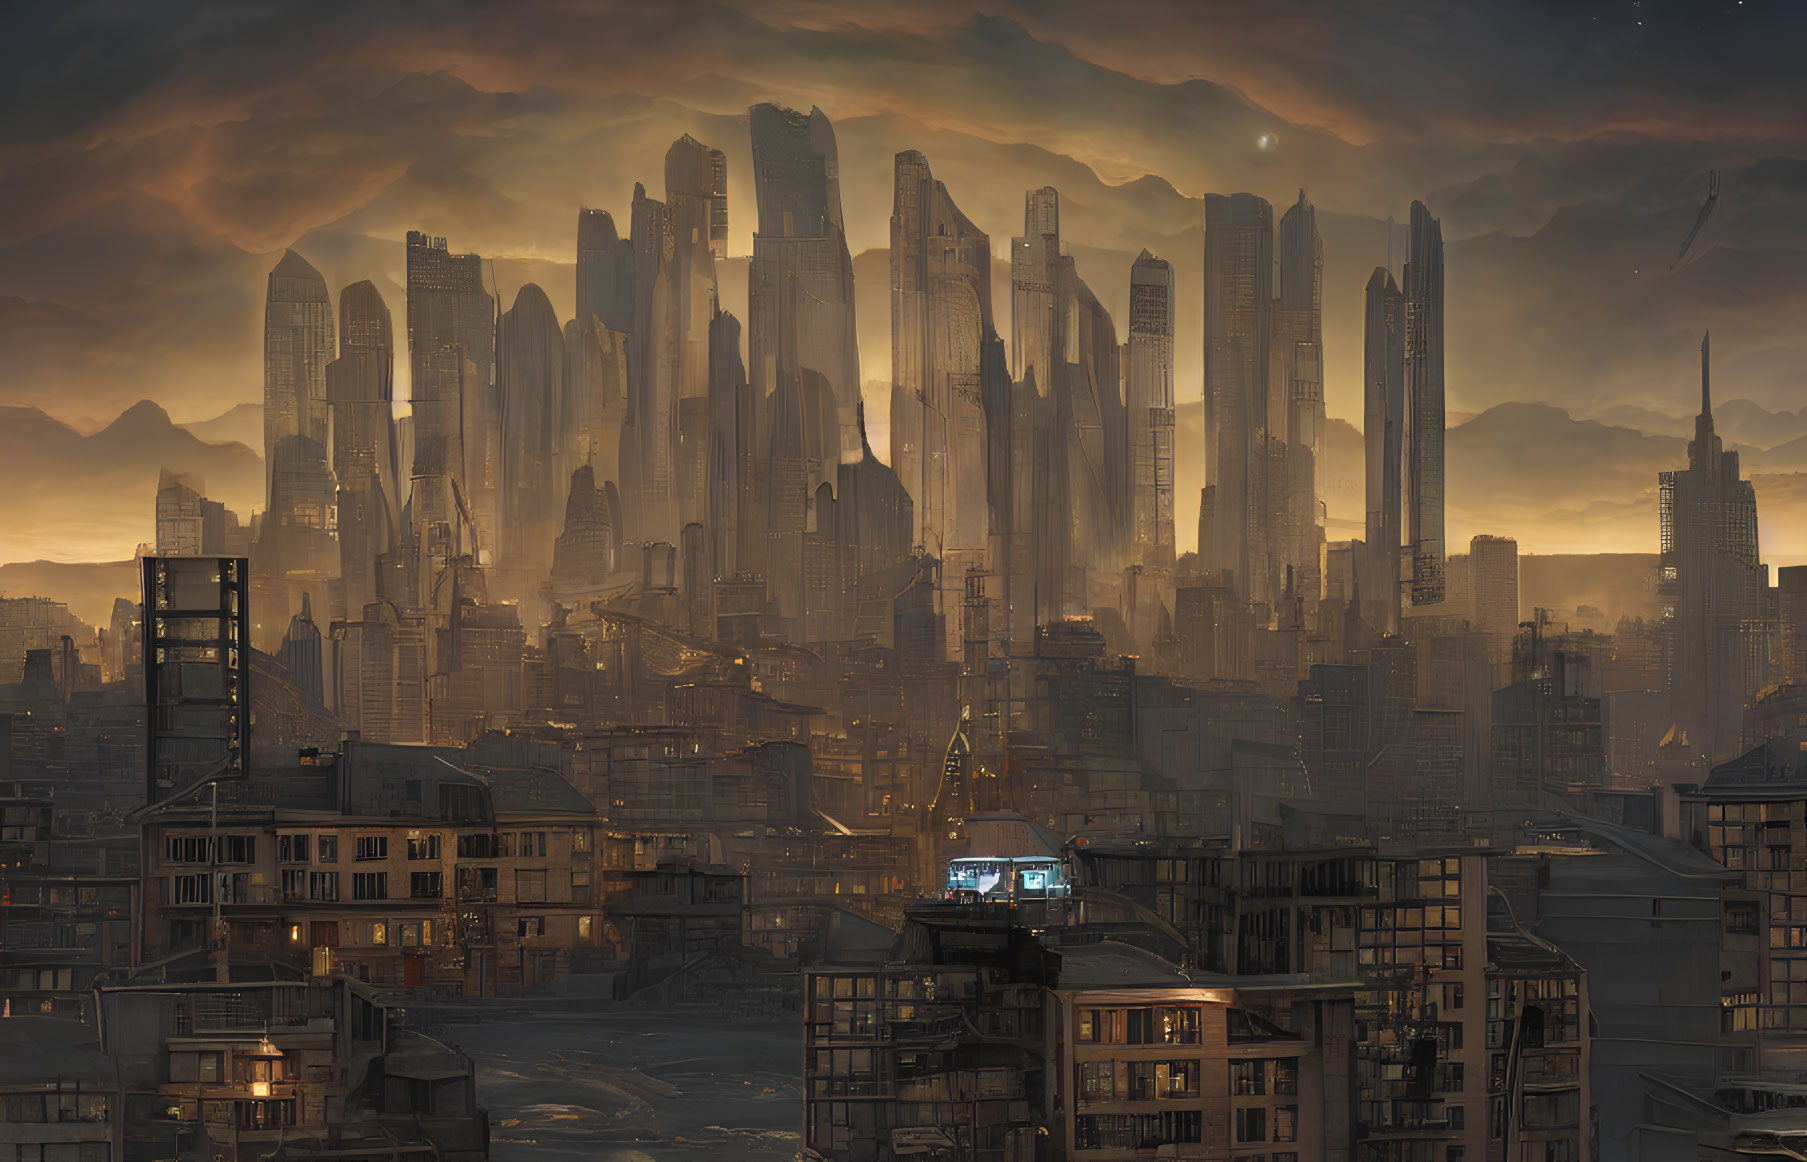 Futuristic cityscape with glowing skyscrapers at dusk